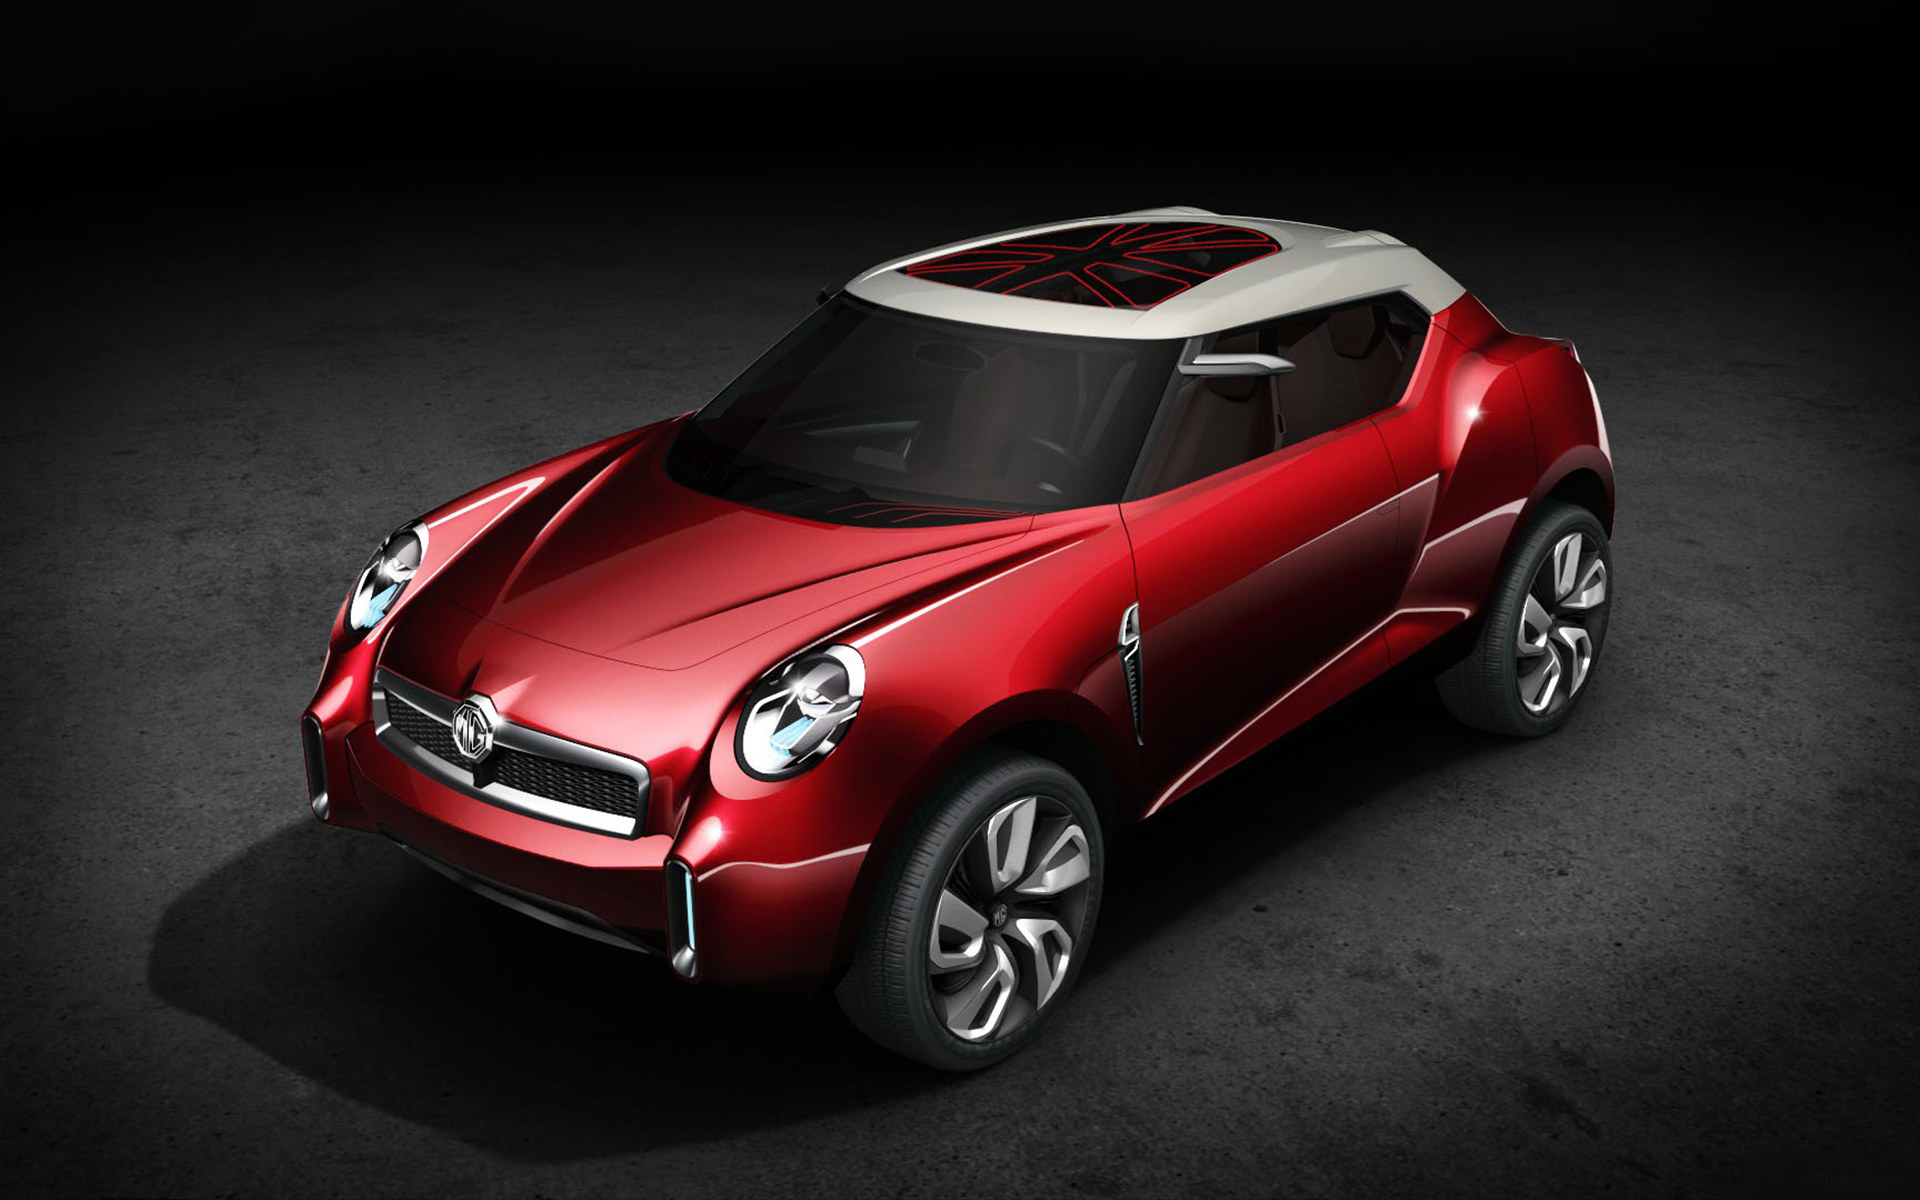 MG Icon Concept 2012 Wallpaper | HD Car Wallpapers | ID #2669